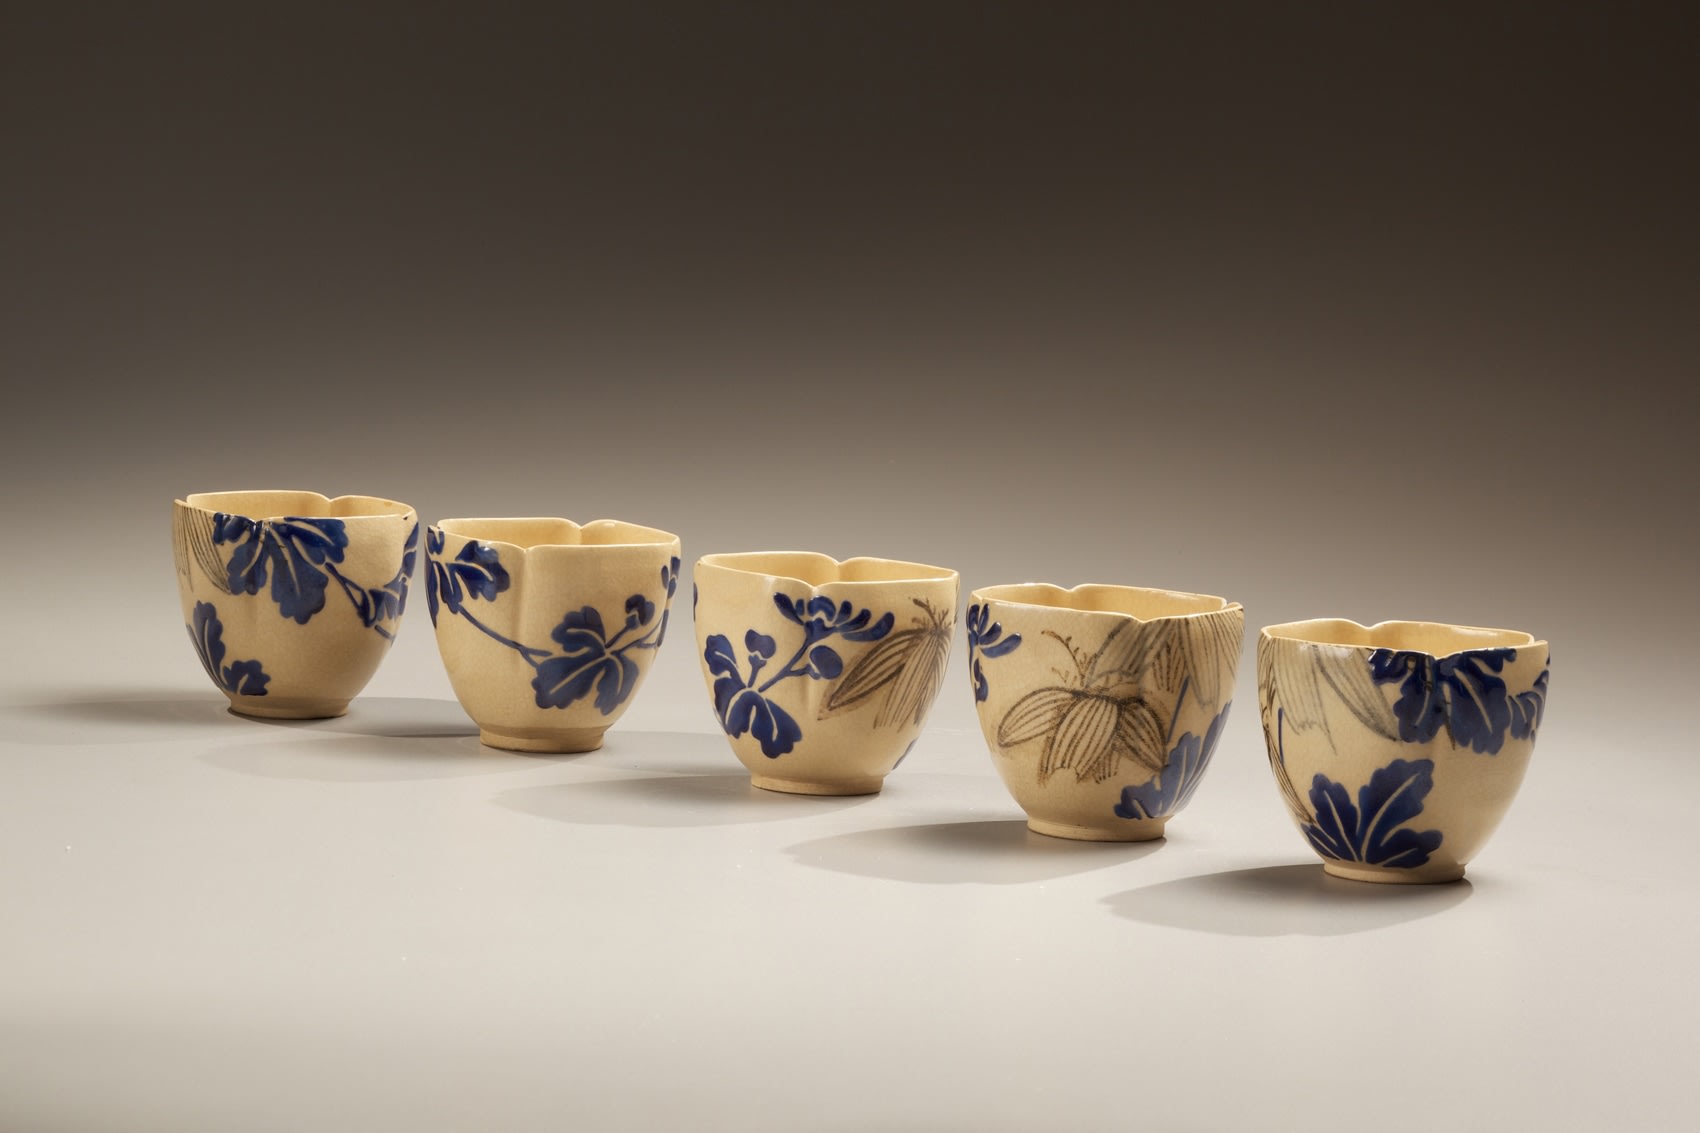 Unknown, A set of 5 small bowls of Mizoro-yaki style of Kyoto